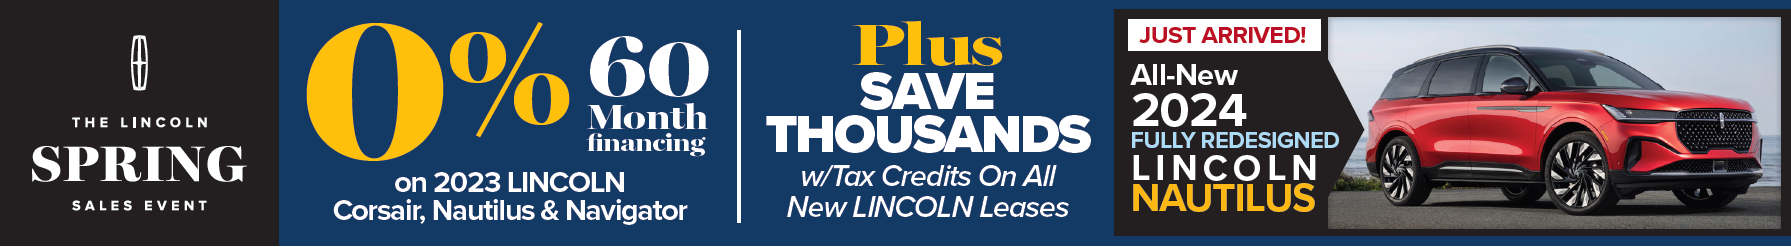 0% financing for 60 months on new 2023 Lincoln Corsair, Nautilus and Navigator in April!